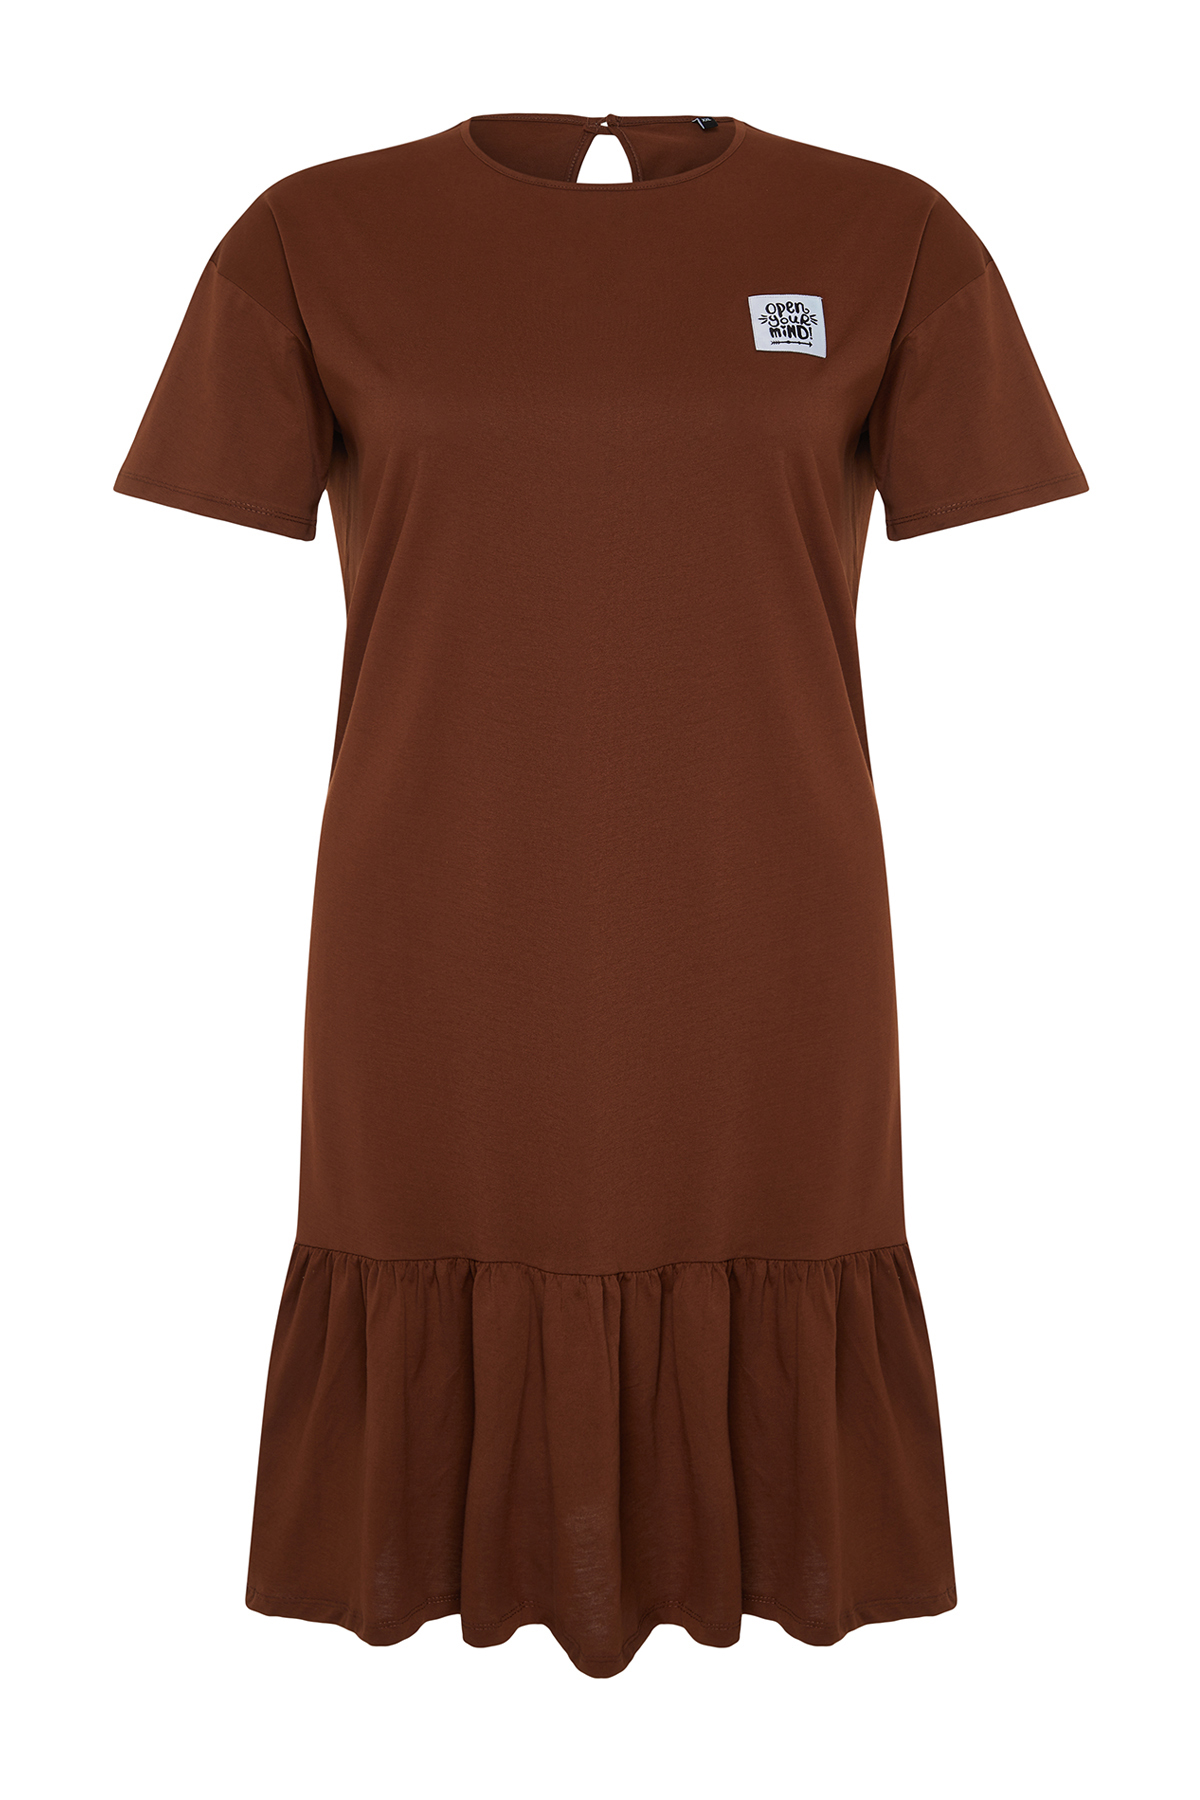 Trendyol Curve Brown Single Jersey Knitted Plus Size Dress